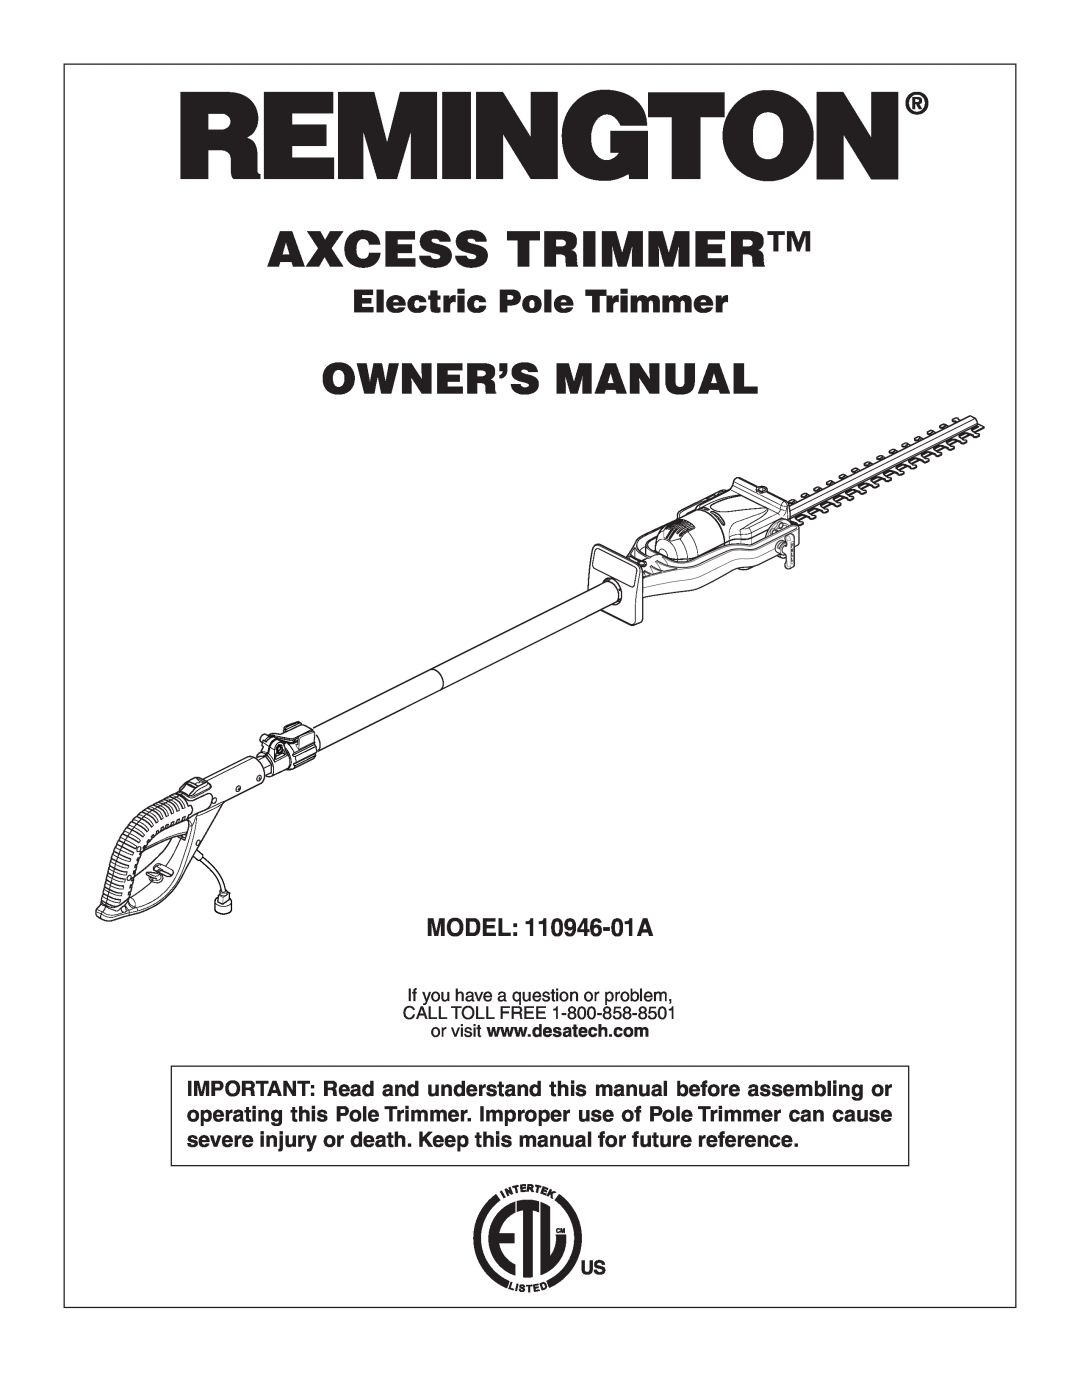 Remington owner manual Axcess Trimmer, Electric Pole Trimmer, MODEL 110946-01A 